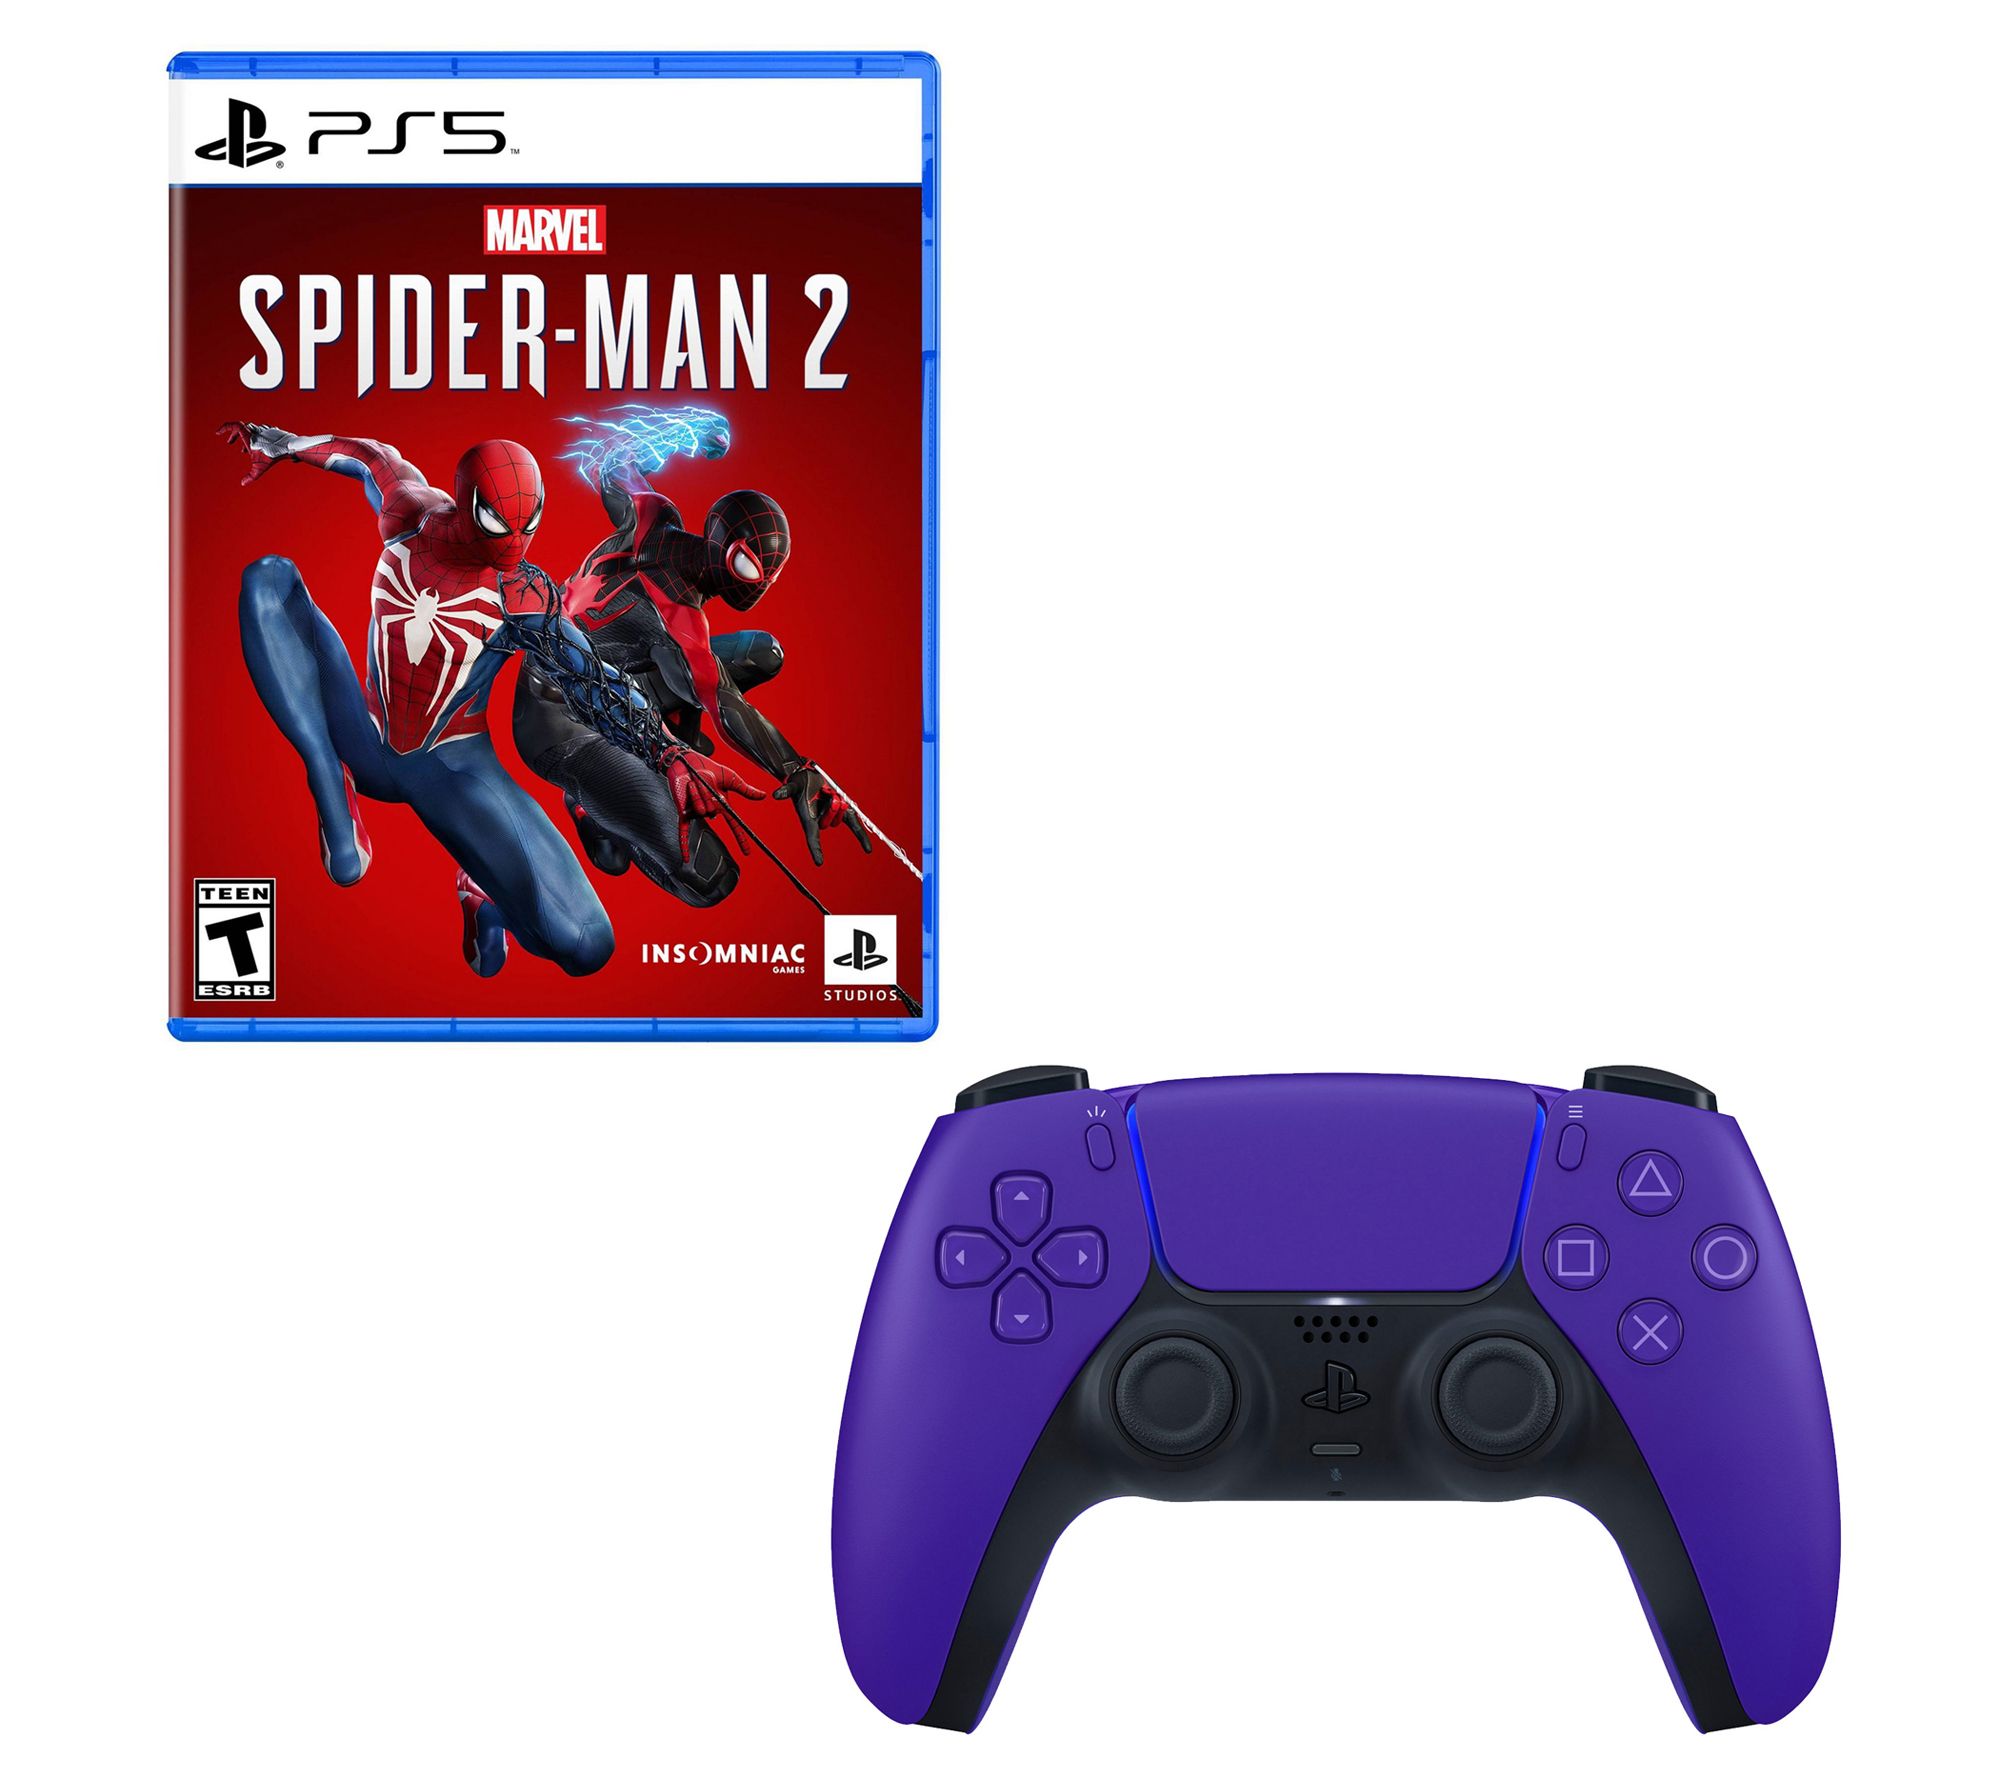 PS5 Spider-Man 2 Game with DualSense Controller - QVC.com